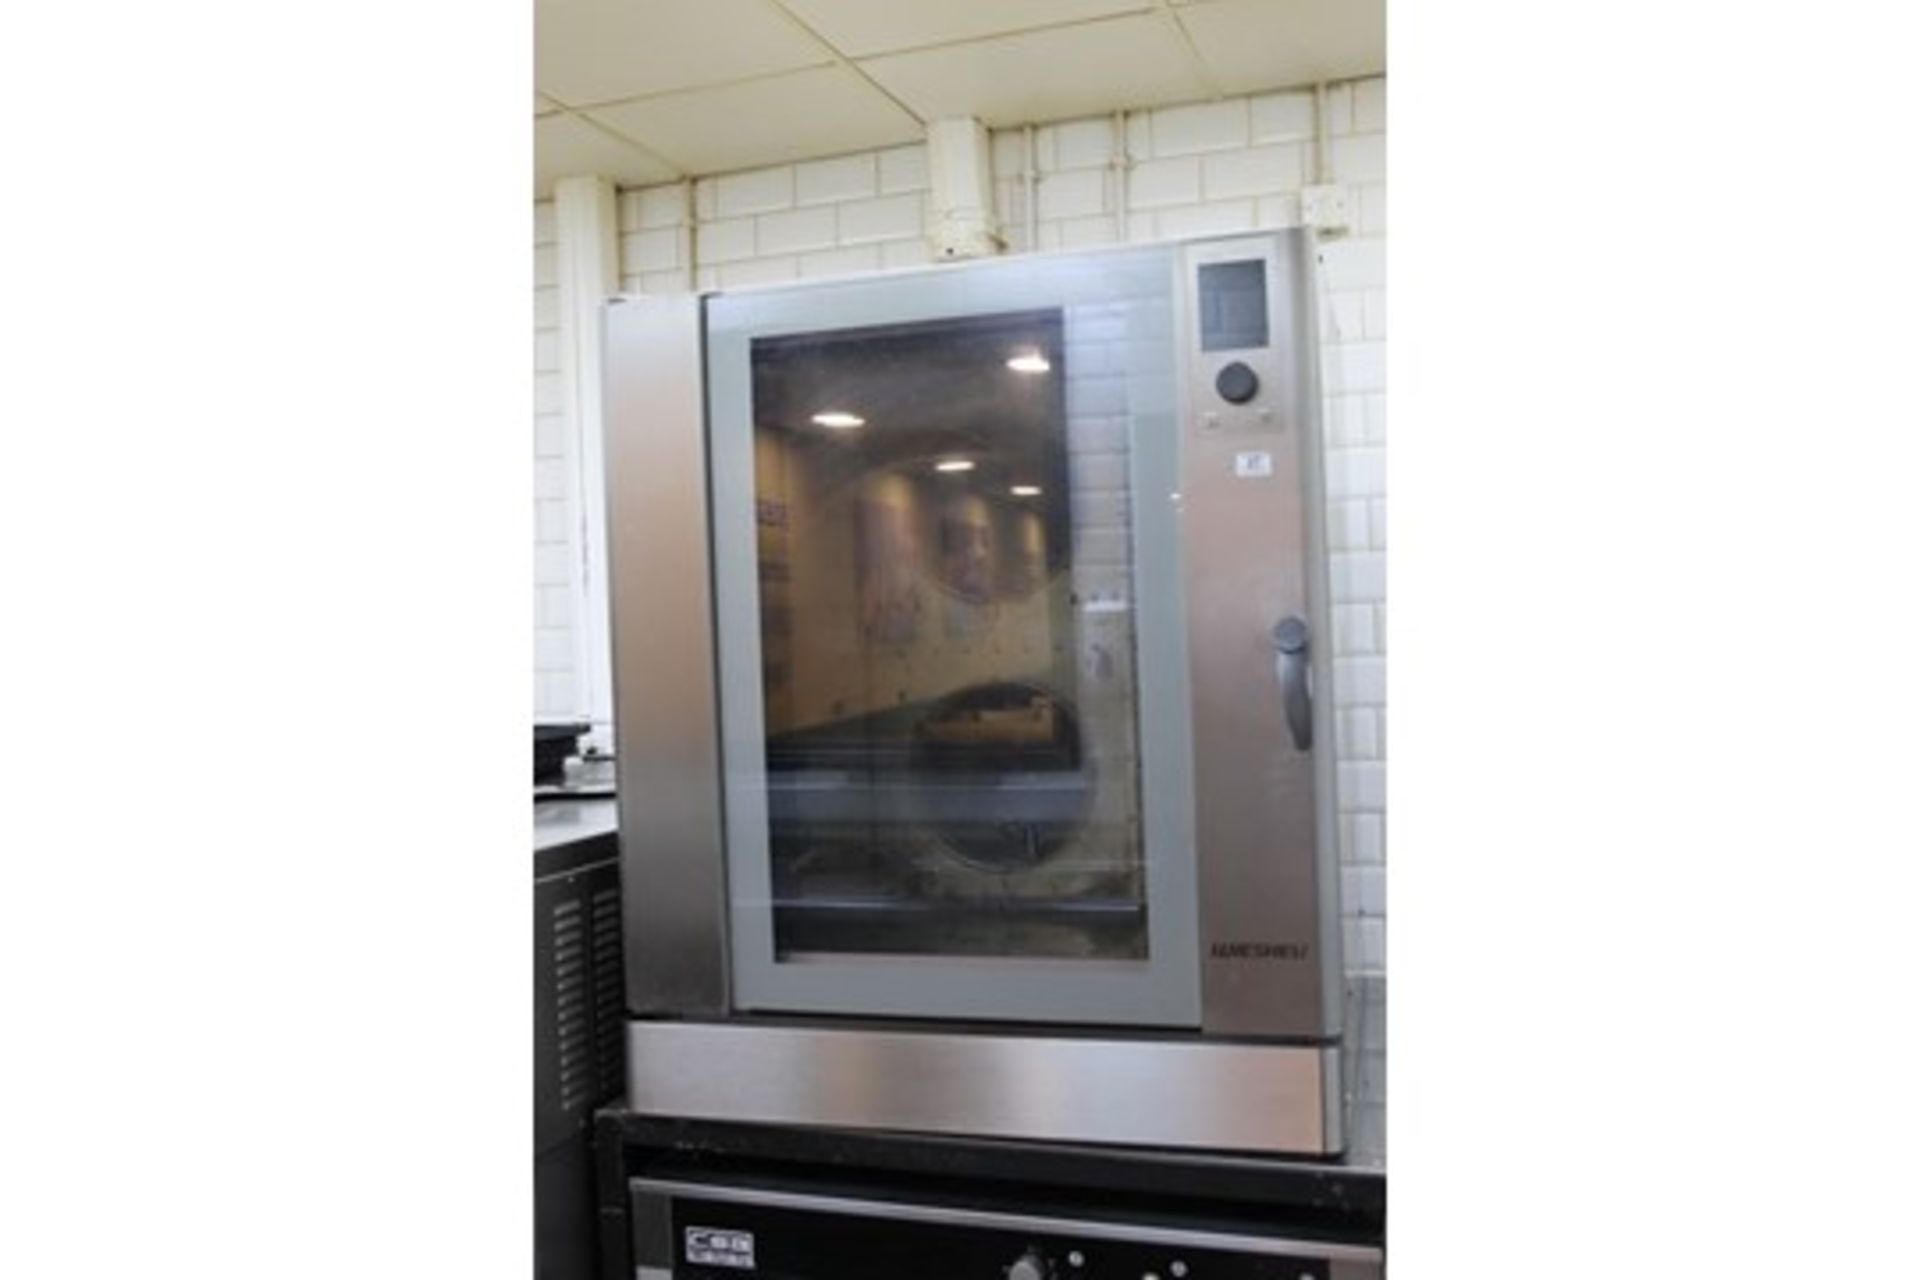 WIESHEU 10 Grid Electric Combi / Steam Oven – 3ph – Excellent “as new” condition